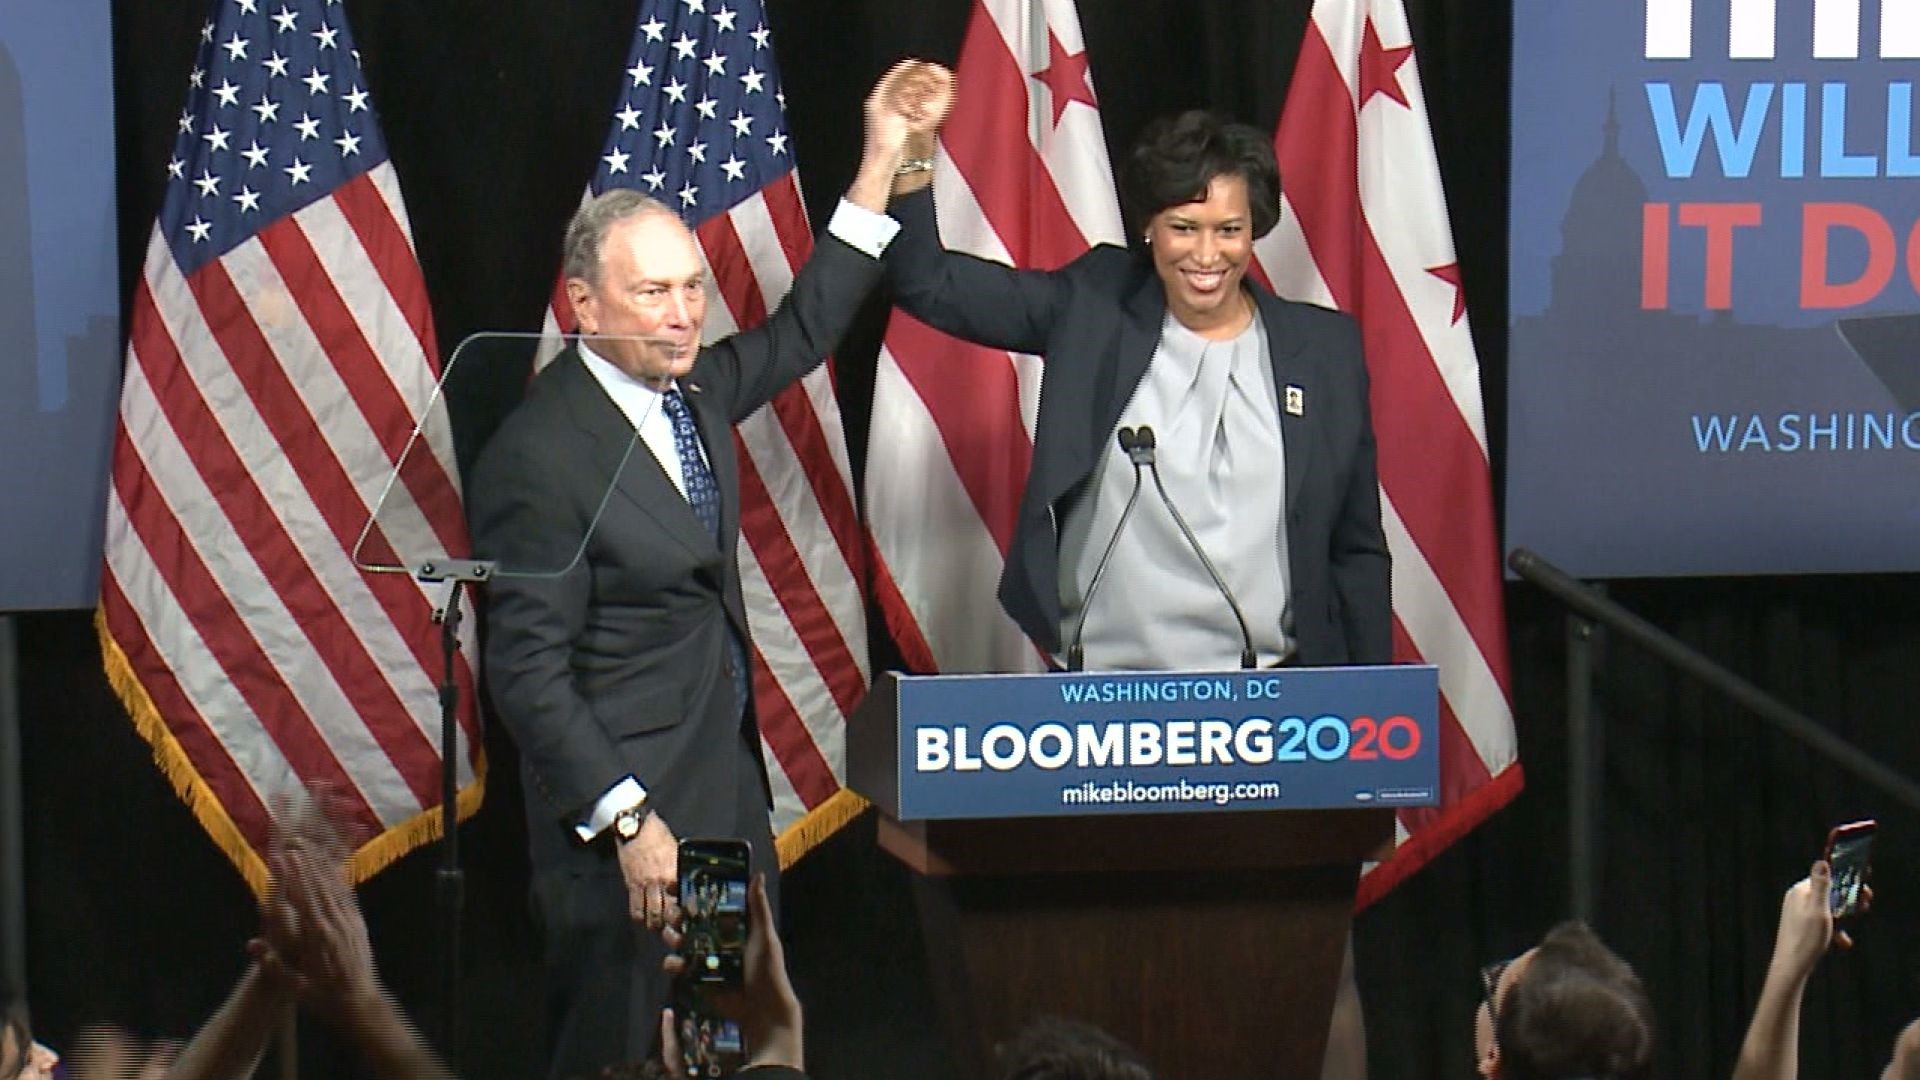 Bowser said she believes Bloomberg expressed 'regret' for sexist comments and stop-and-frisk. In her view, Bloomberg is still best positioned to beat Trump.